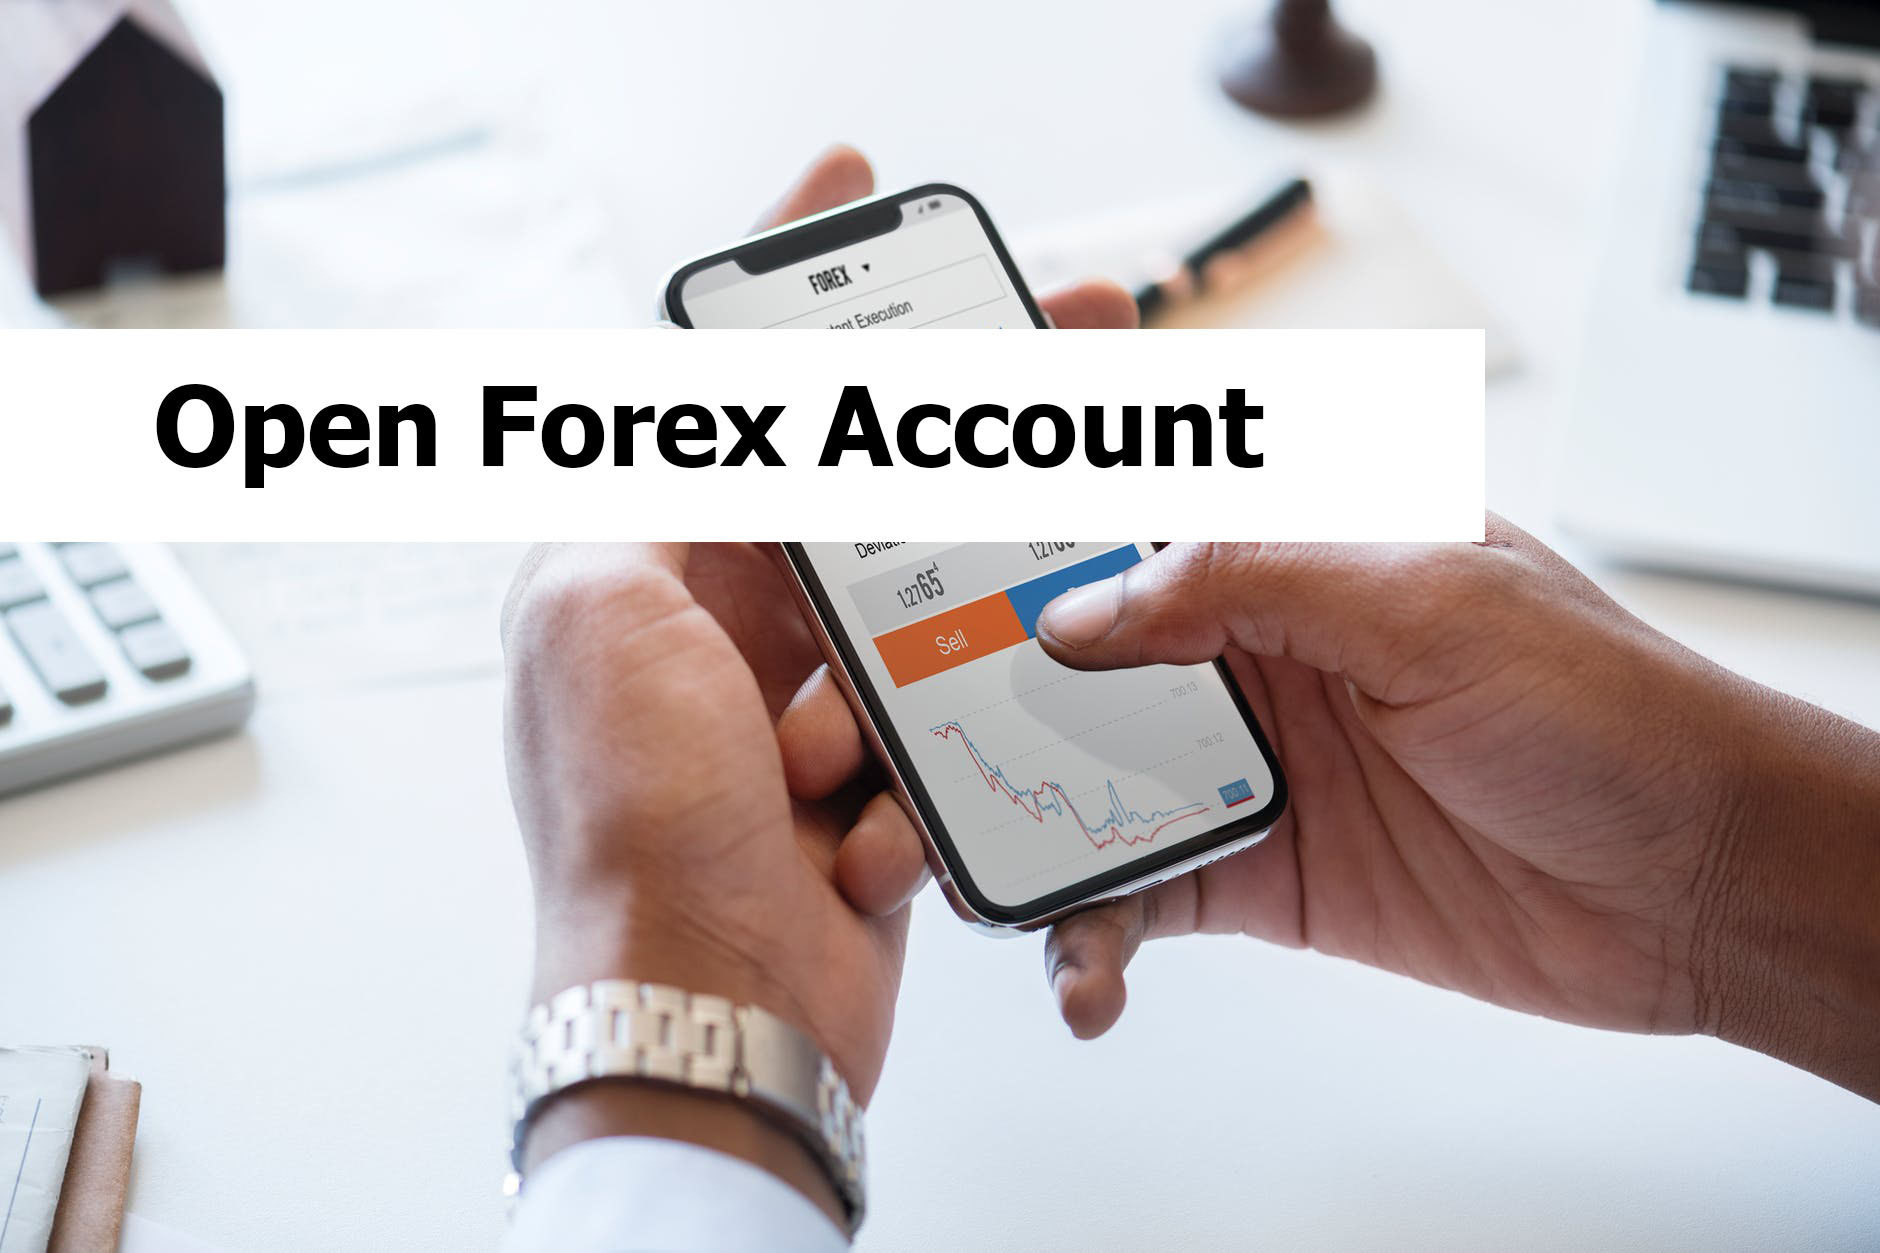  What you need for opening a Forex Account